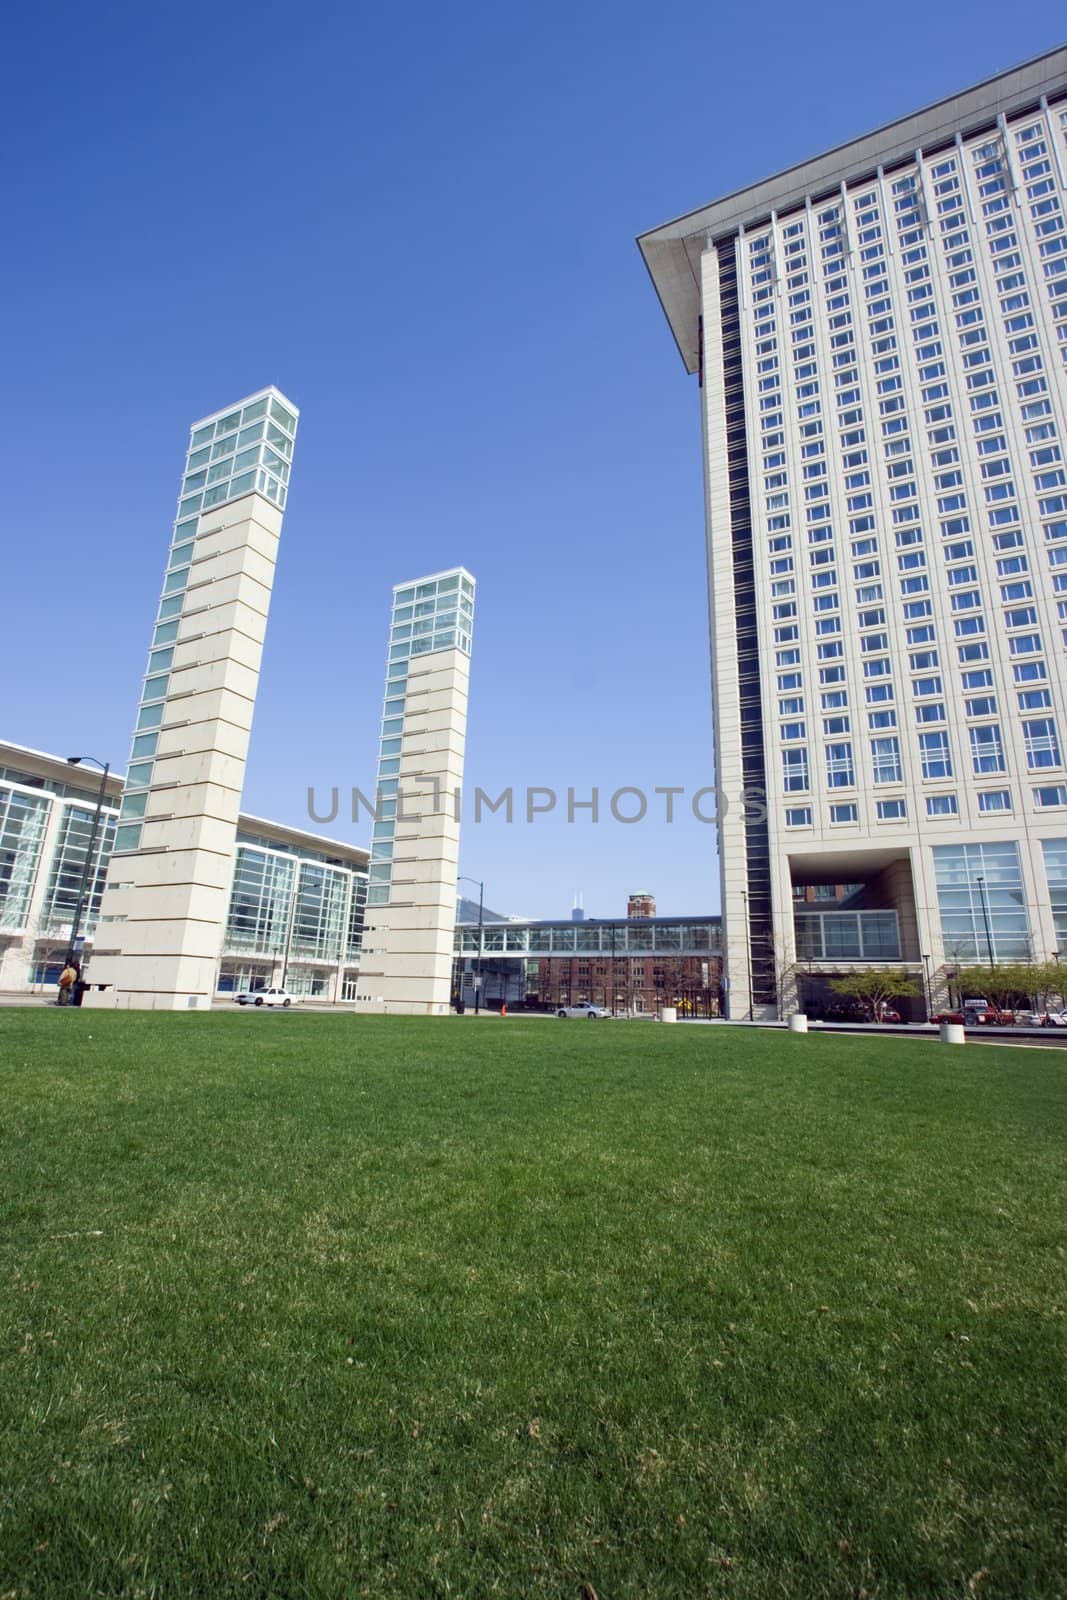 McCormick Place in Chicago in Chicago, Illinois.[